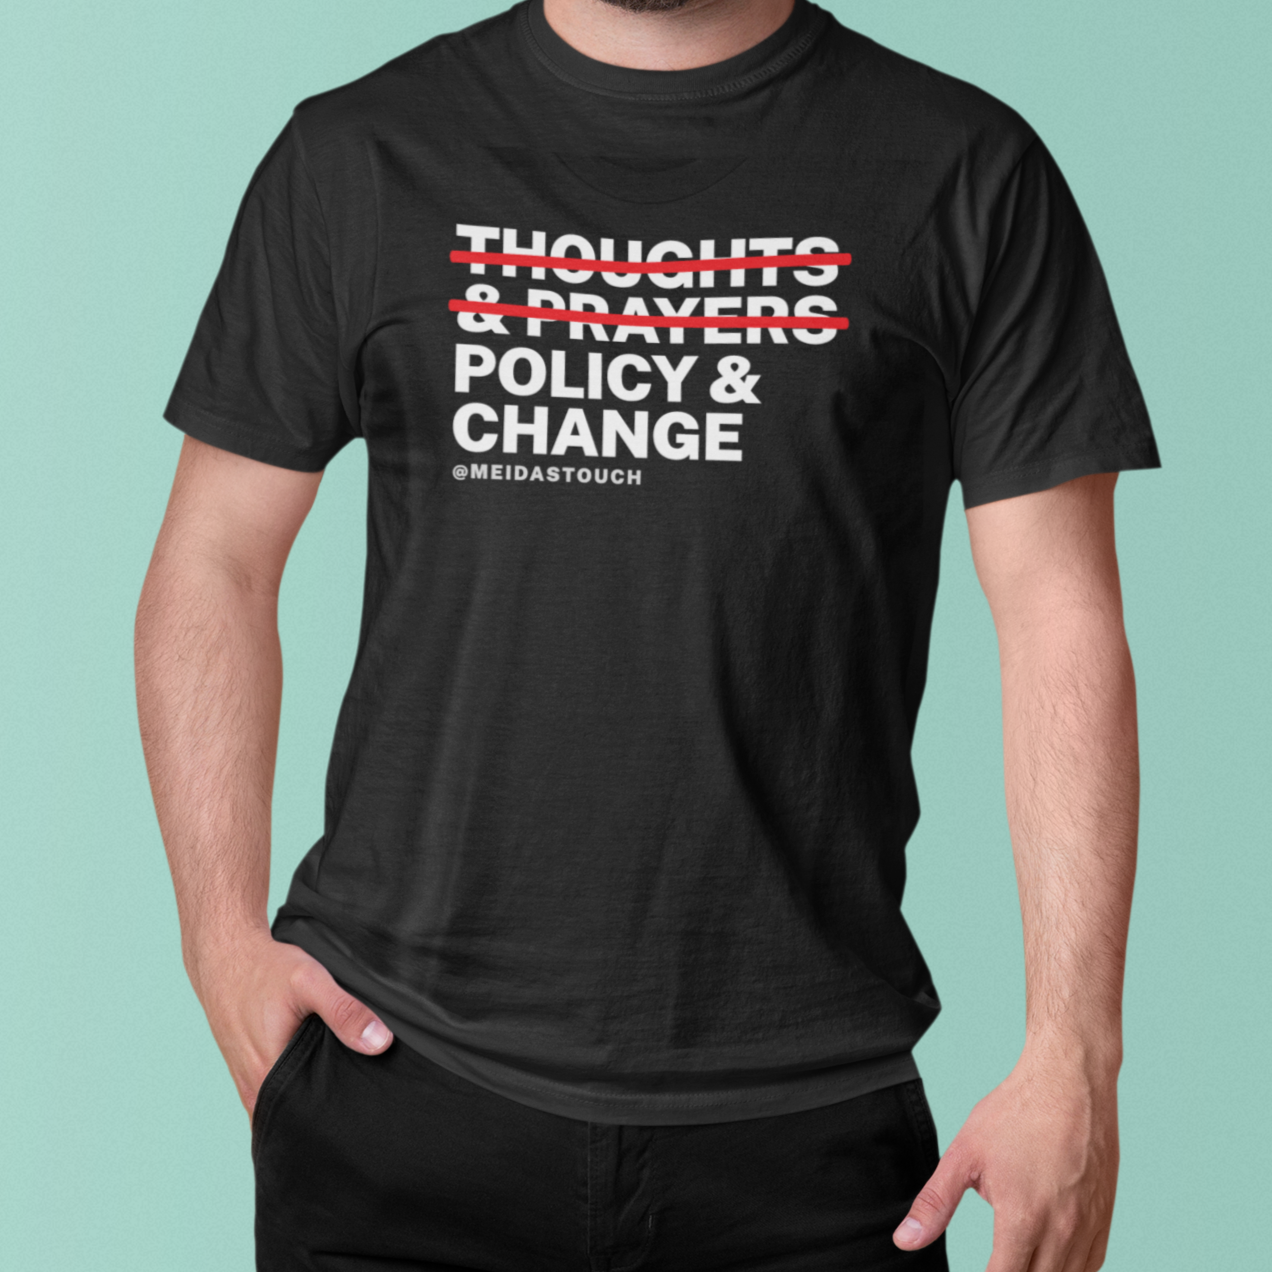 Policy and Change Tee